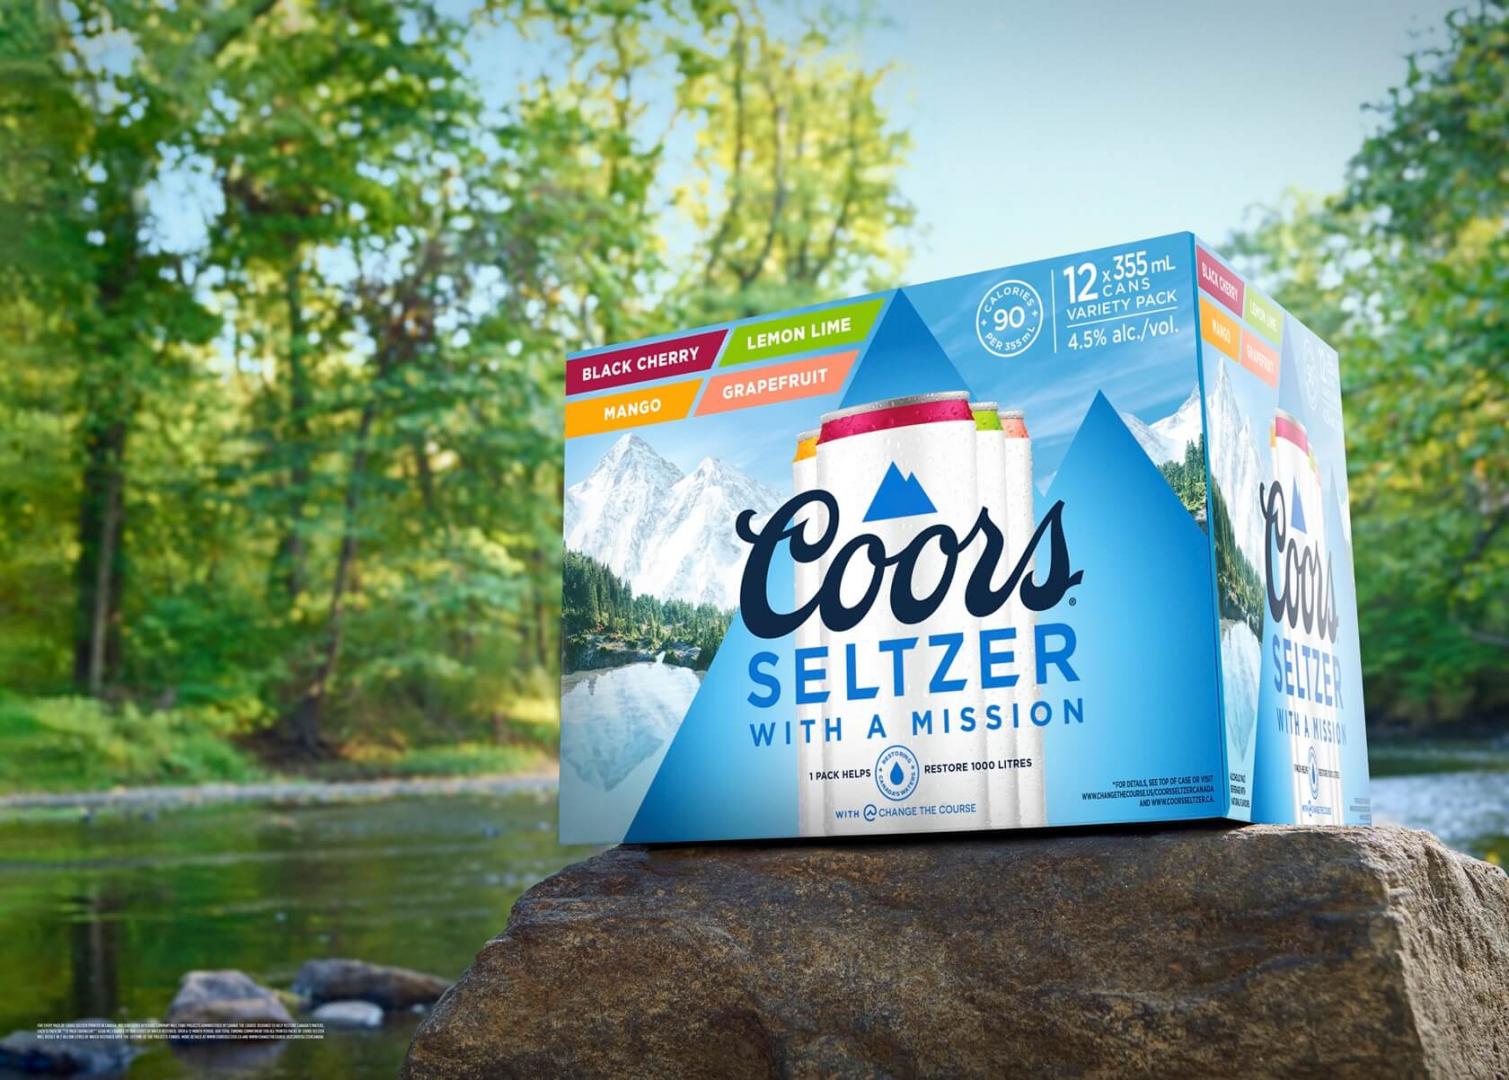 Coors Seltzer with a mission